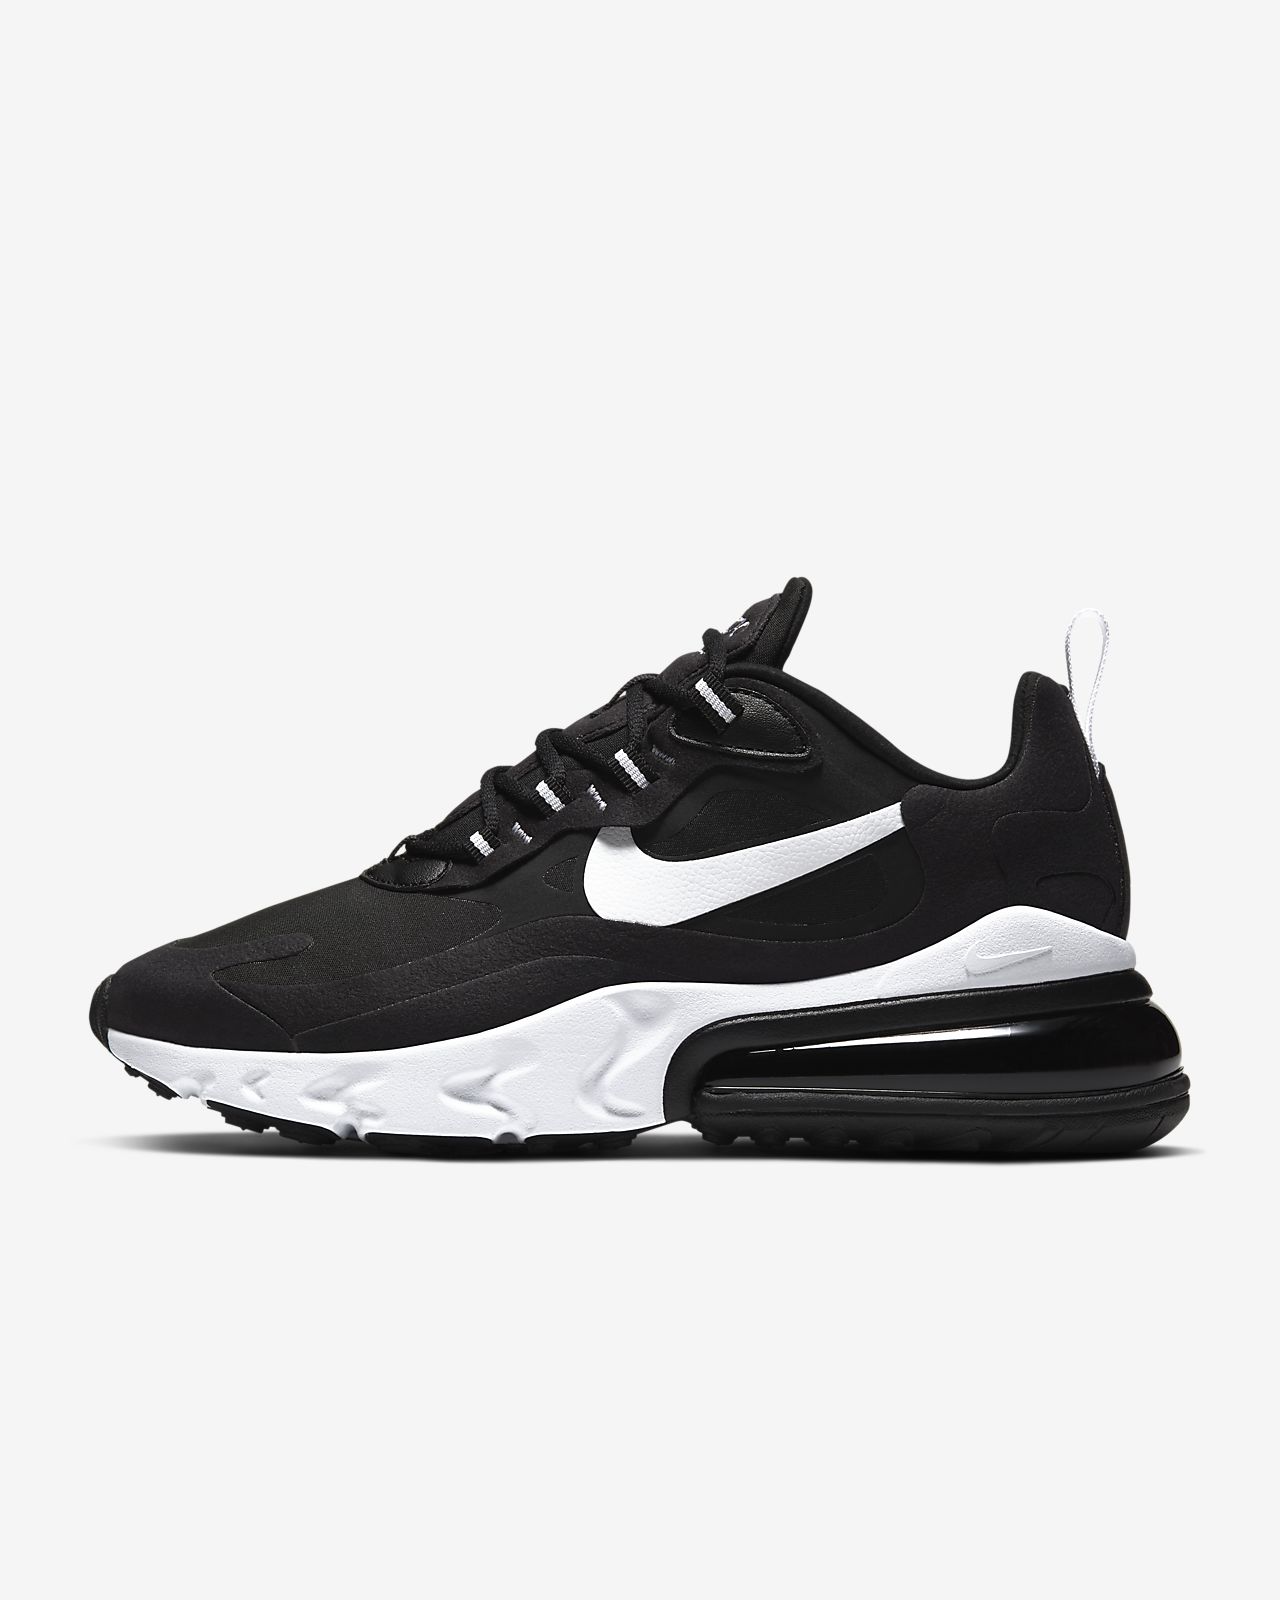 nike 270 black and white womens size 7